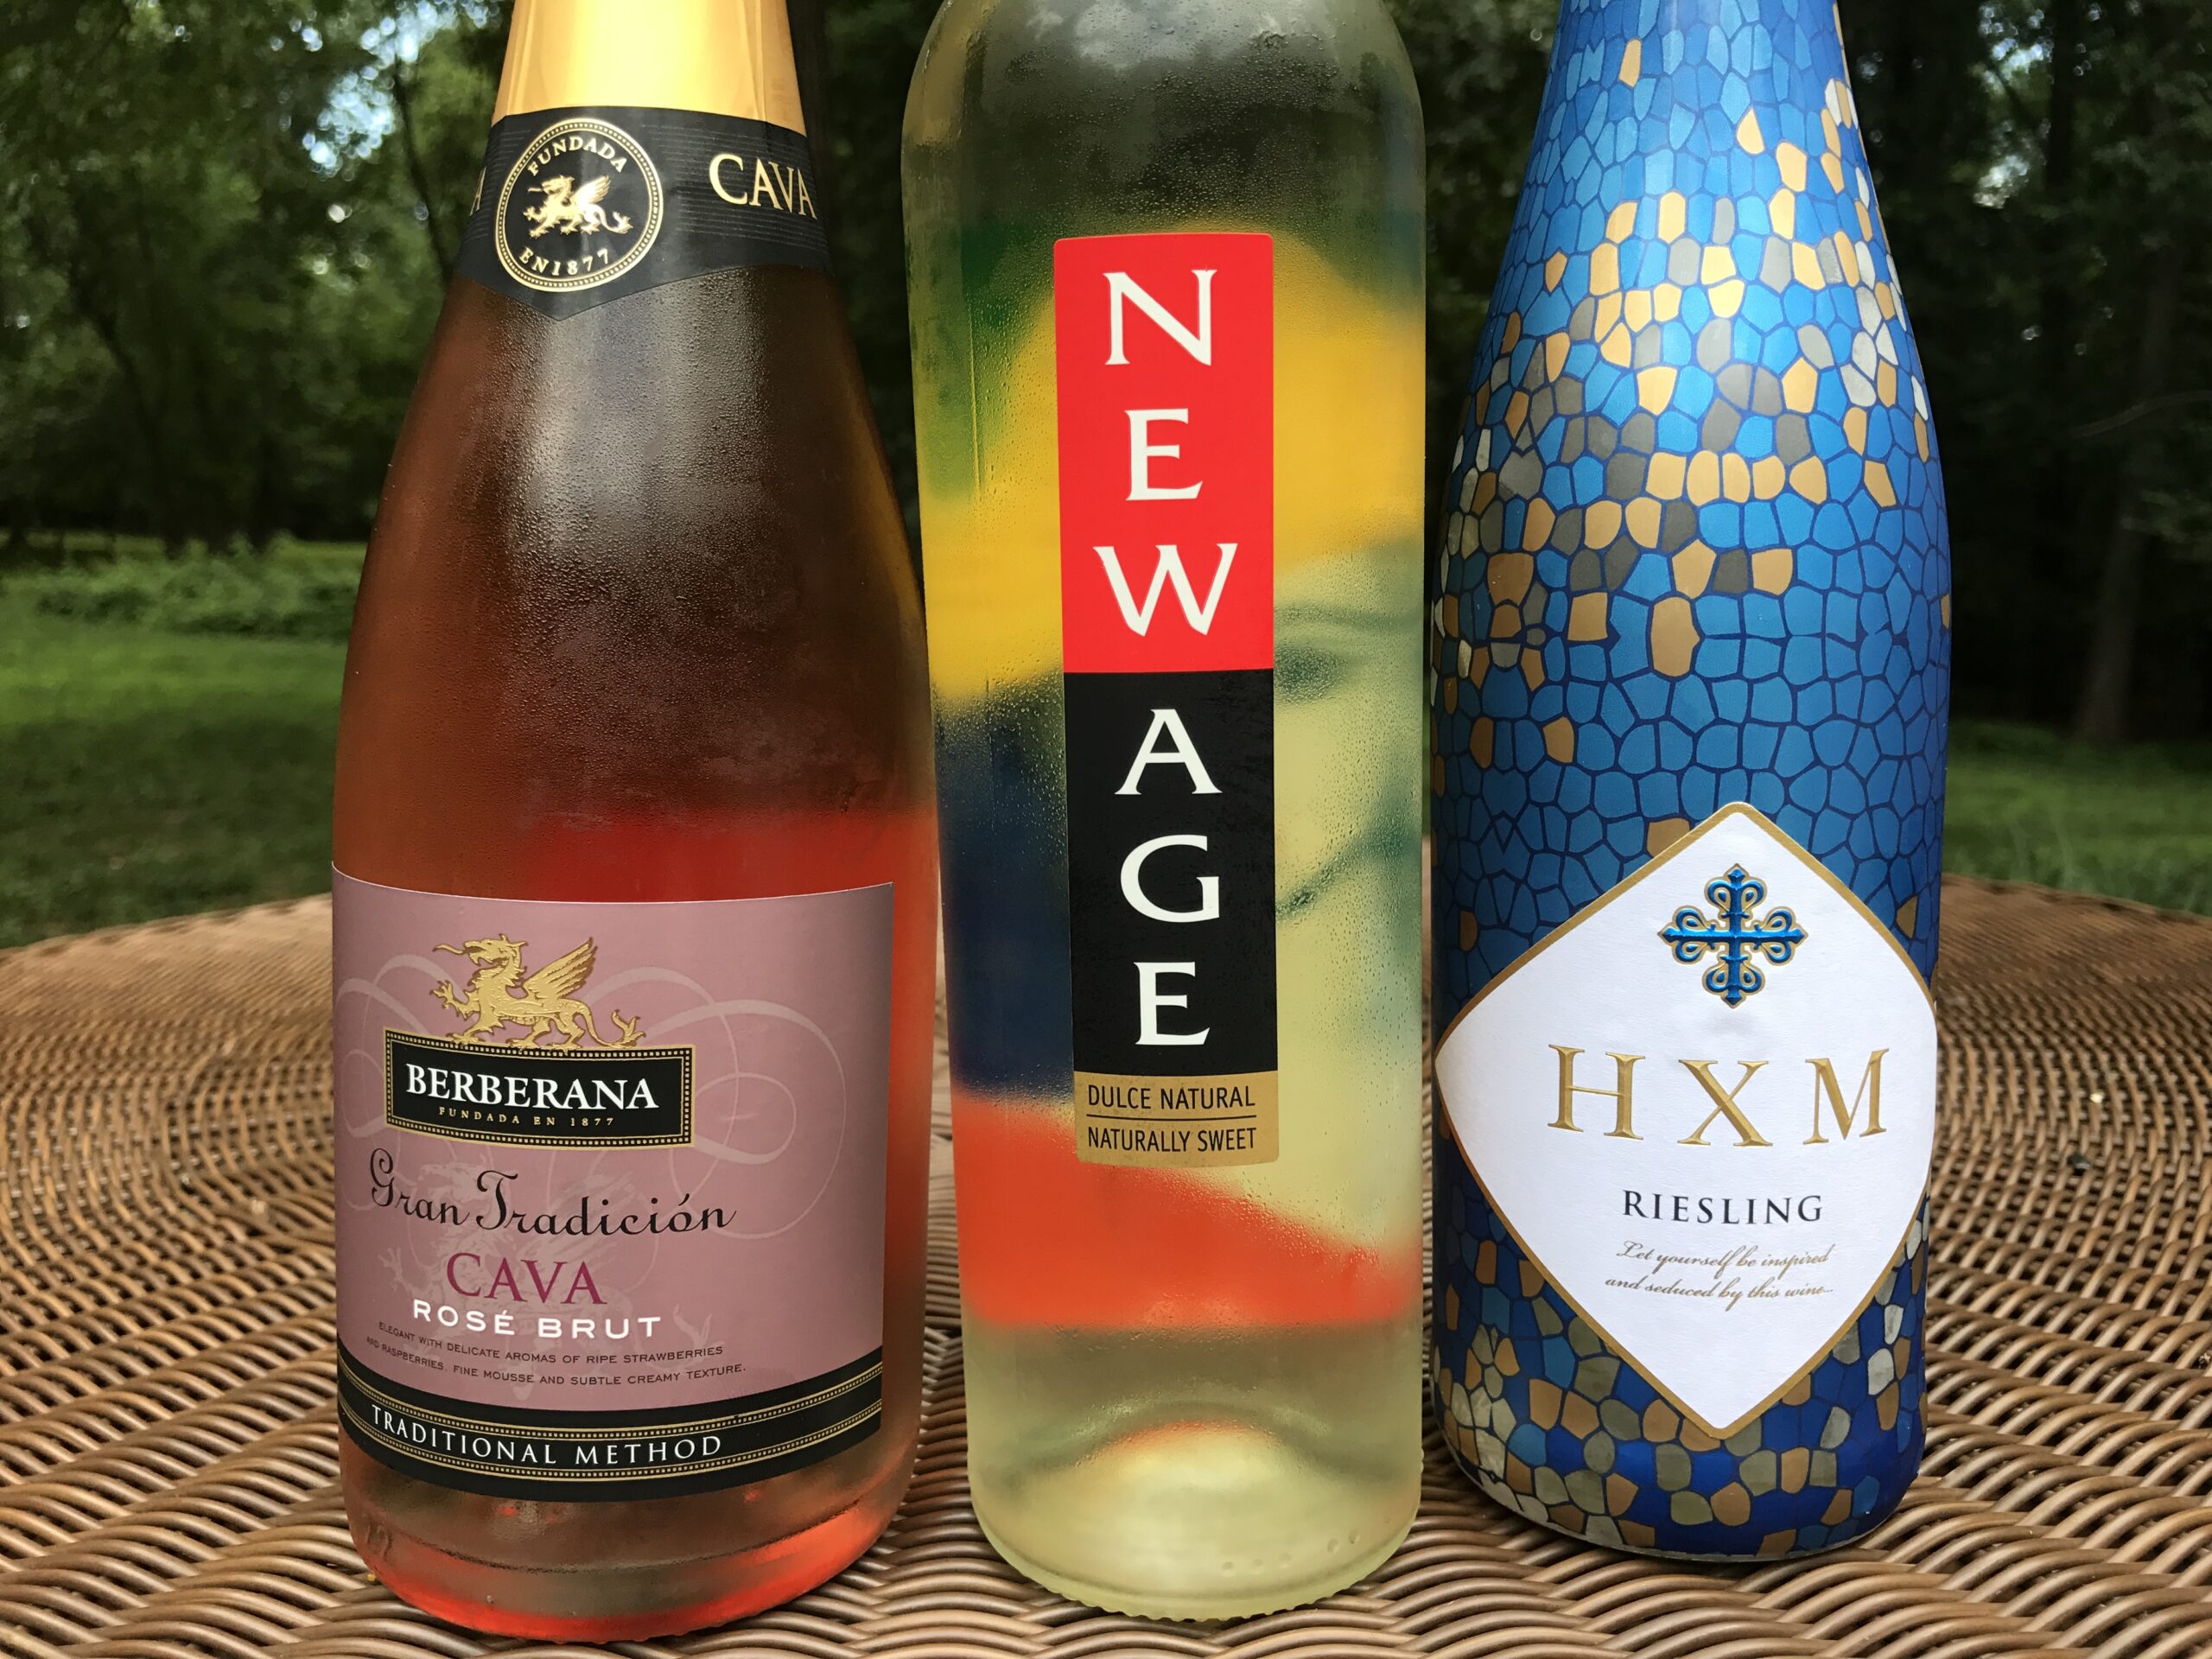 Red White and Blue Wines for the 4th of July